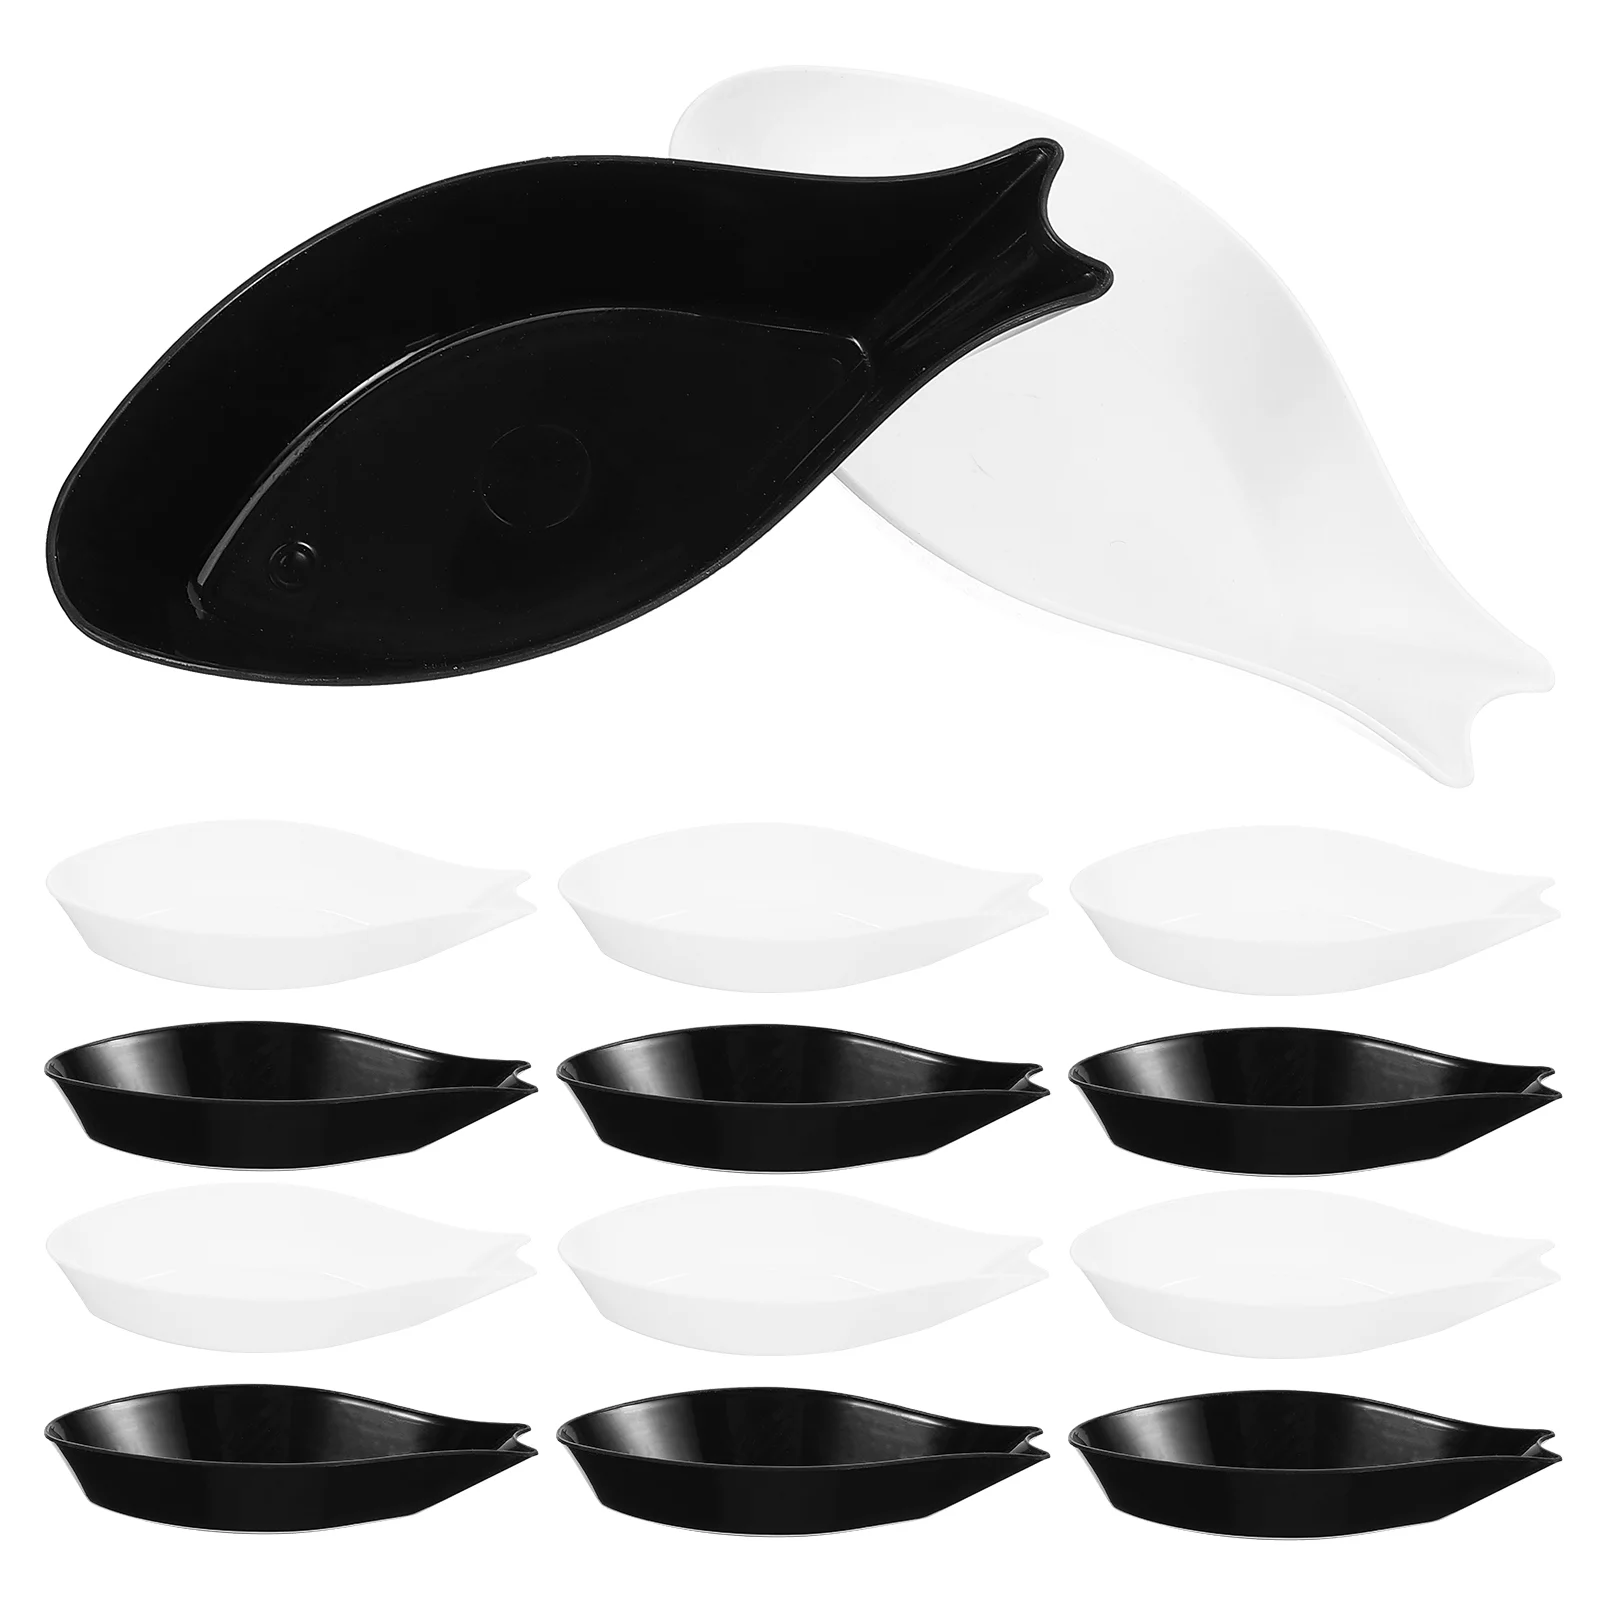 

20pcs Dish Set Appetizer Plates Soy Sauce Bowls Soy Sauce Container Dipping Cups Small Sauce Bowls for Mustard Soy Sauce Soup